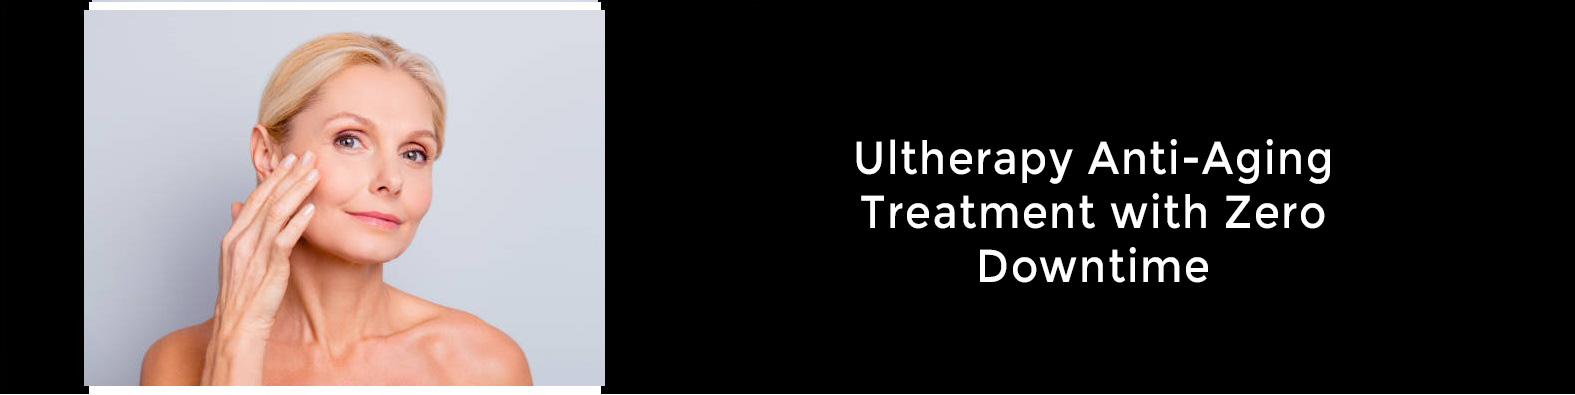 ultherapy-anti-aging-treatment-with-zerodowntime